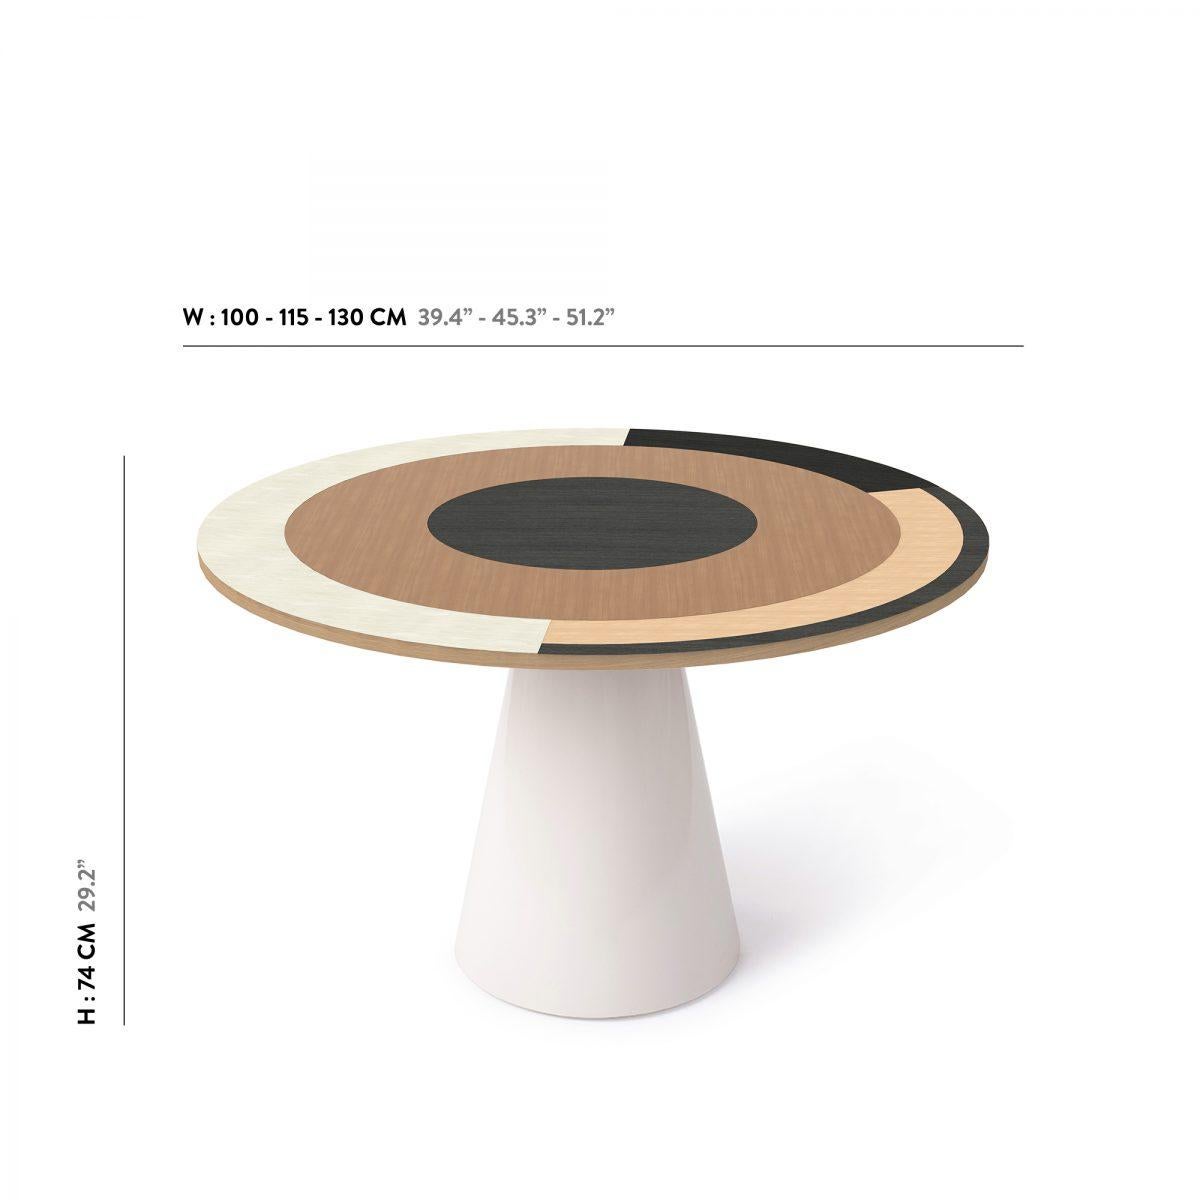 Modern Sonia et Caetera Dining Table M2 Designed by Thomas Dariel For Sale